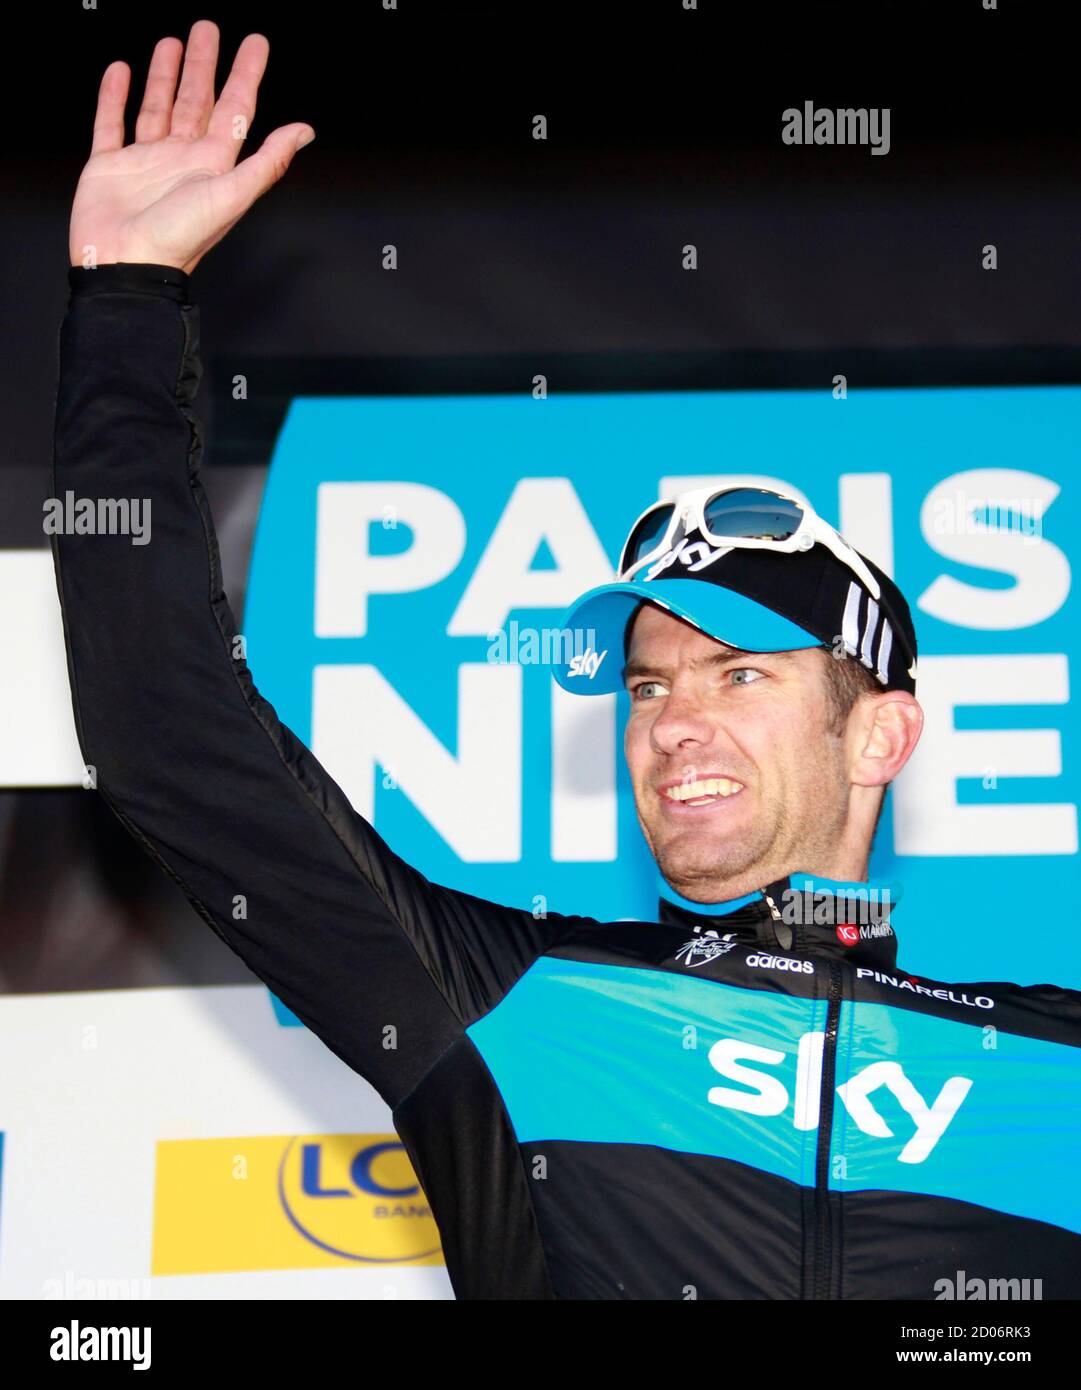 Sky team rider Gregory Henderson of New Zealand celebrates winning the second stage of the Paris-Nice cycling race between Montfort-L'Amaury and Amilly March 7, 2011. REUTERS/Eric - Tags: SPORT CYCLING